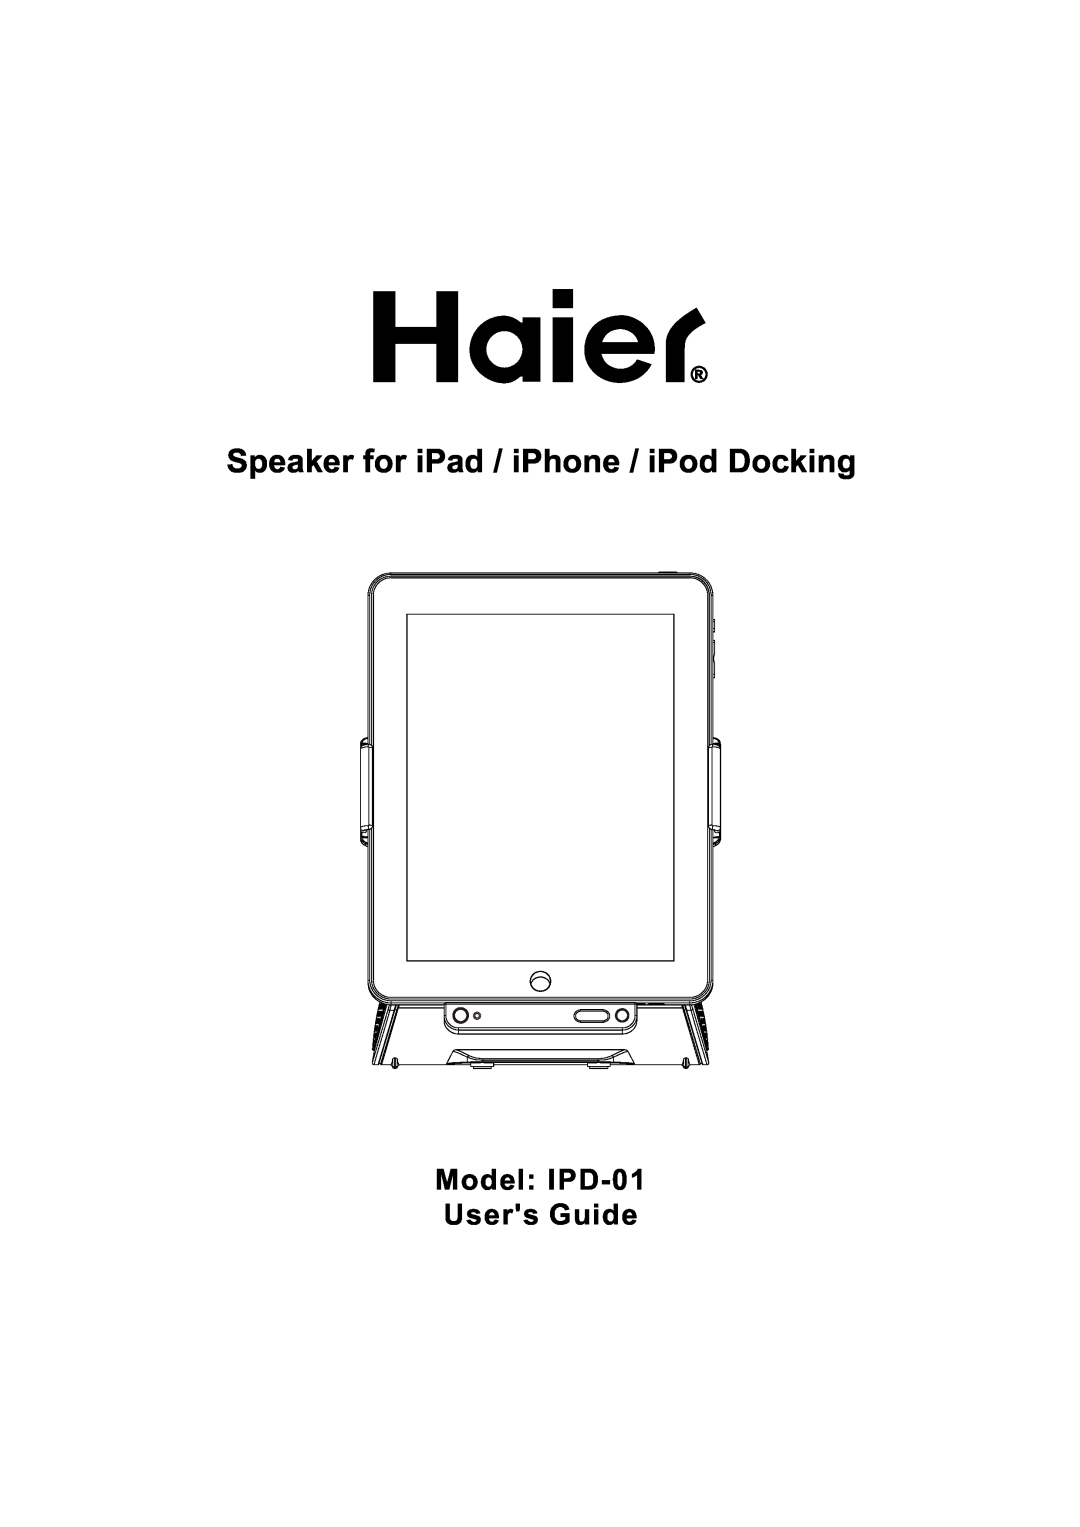 Haier manual Speaker for iPad / iPhone / iPod Docking, Model IPD-01Users Guide 